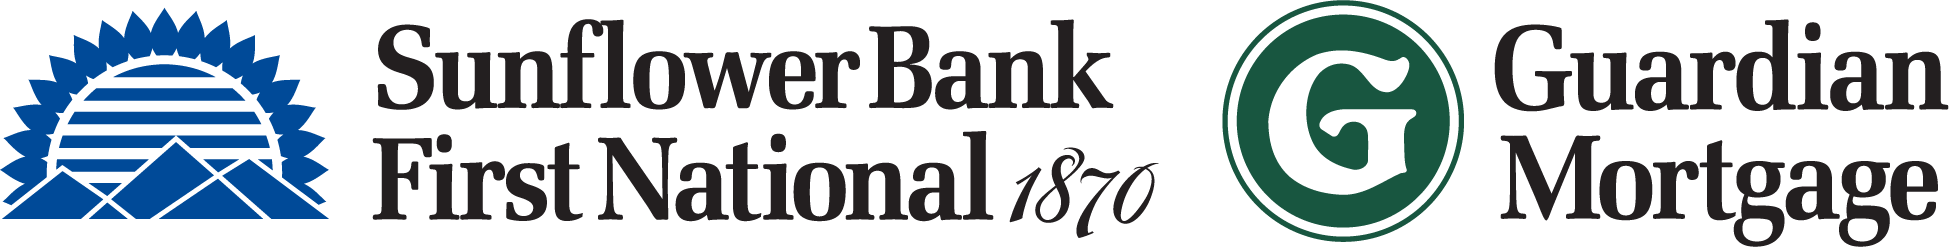 Sunflower Bank, First National 1870, Guardian Mortgage Logo